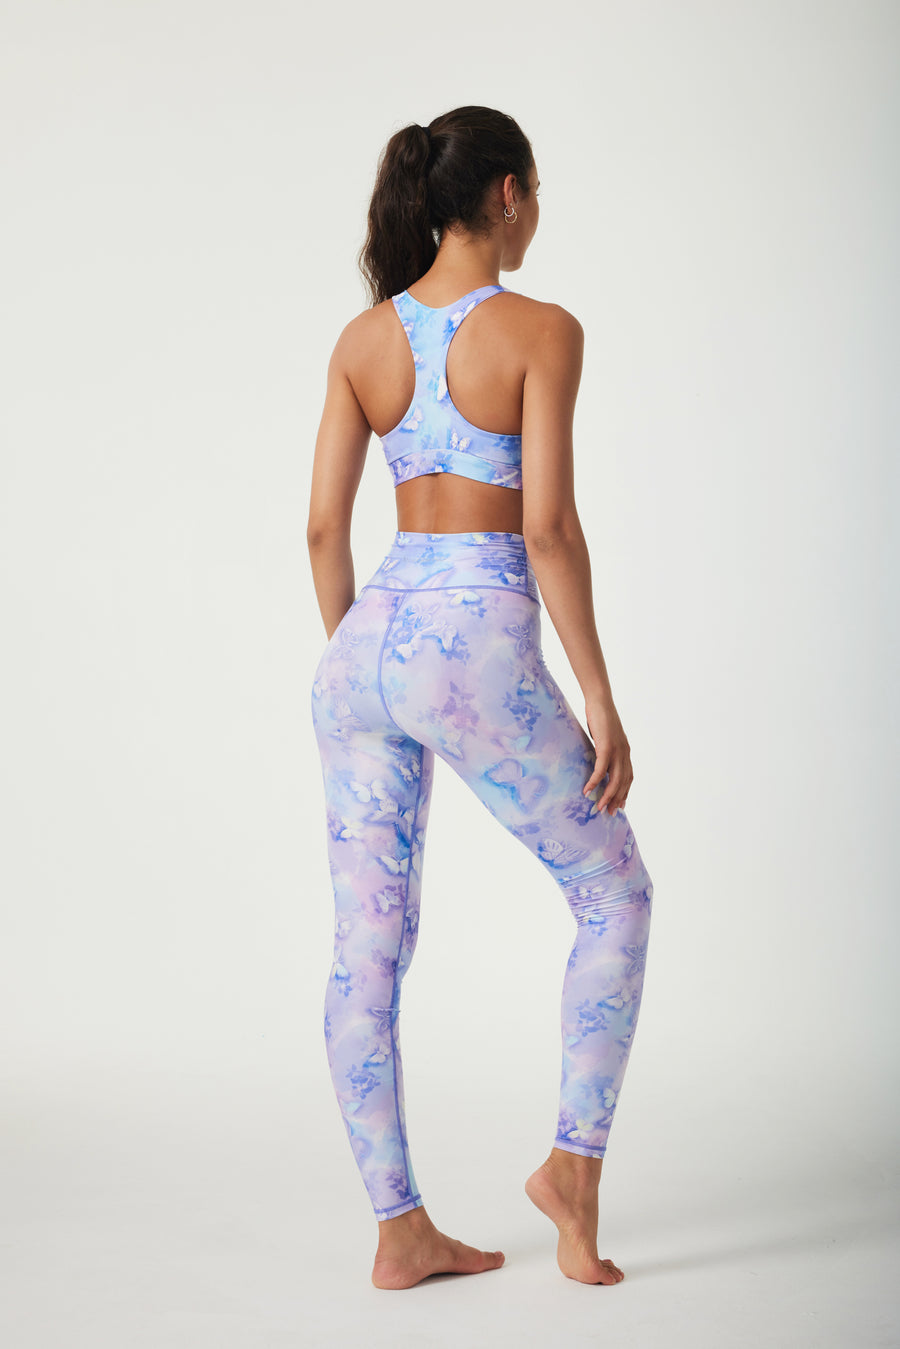 Butterfly High-waisted Leggings - SILVERWIND